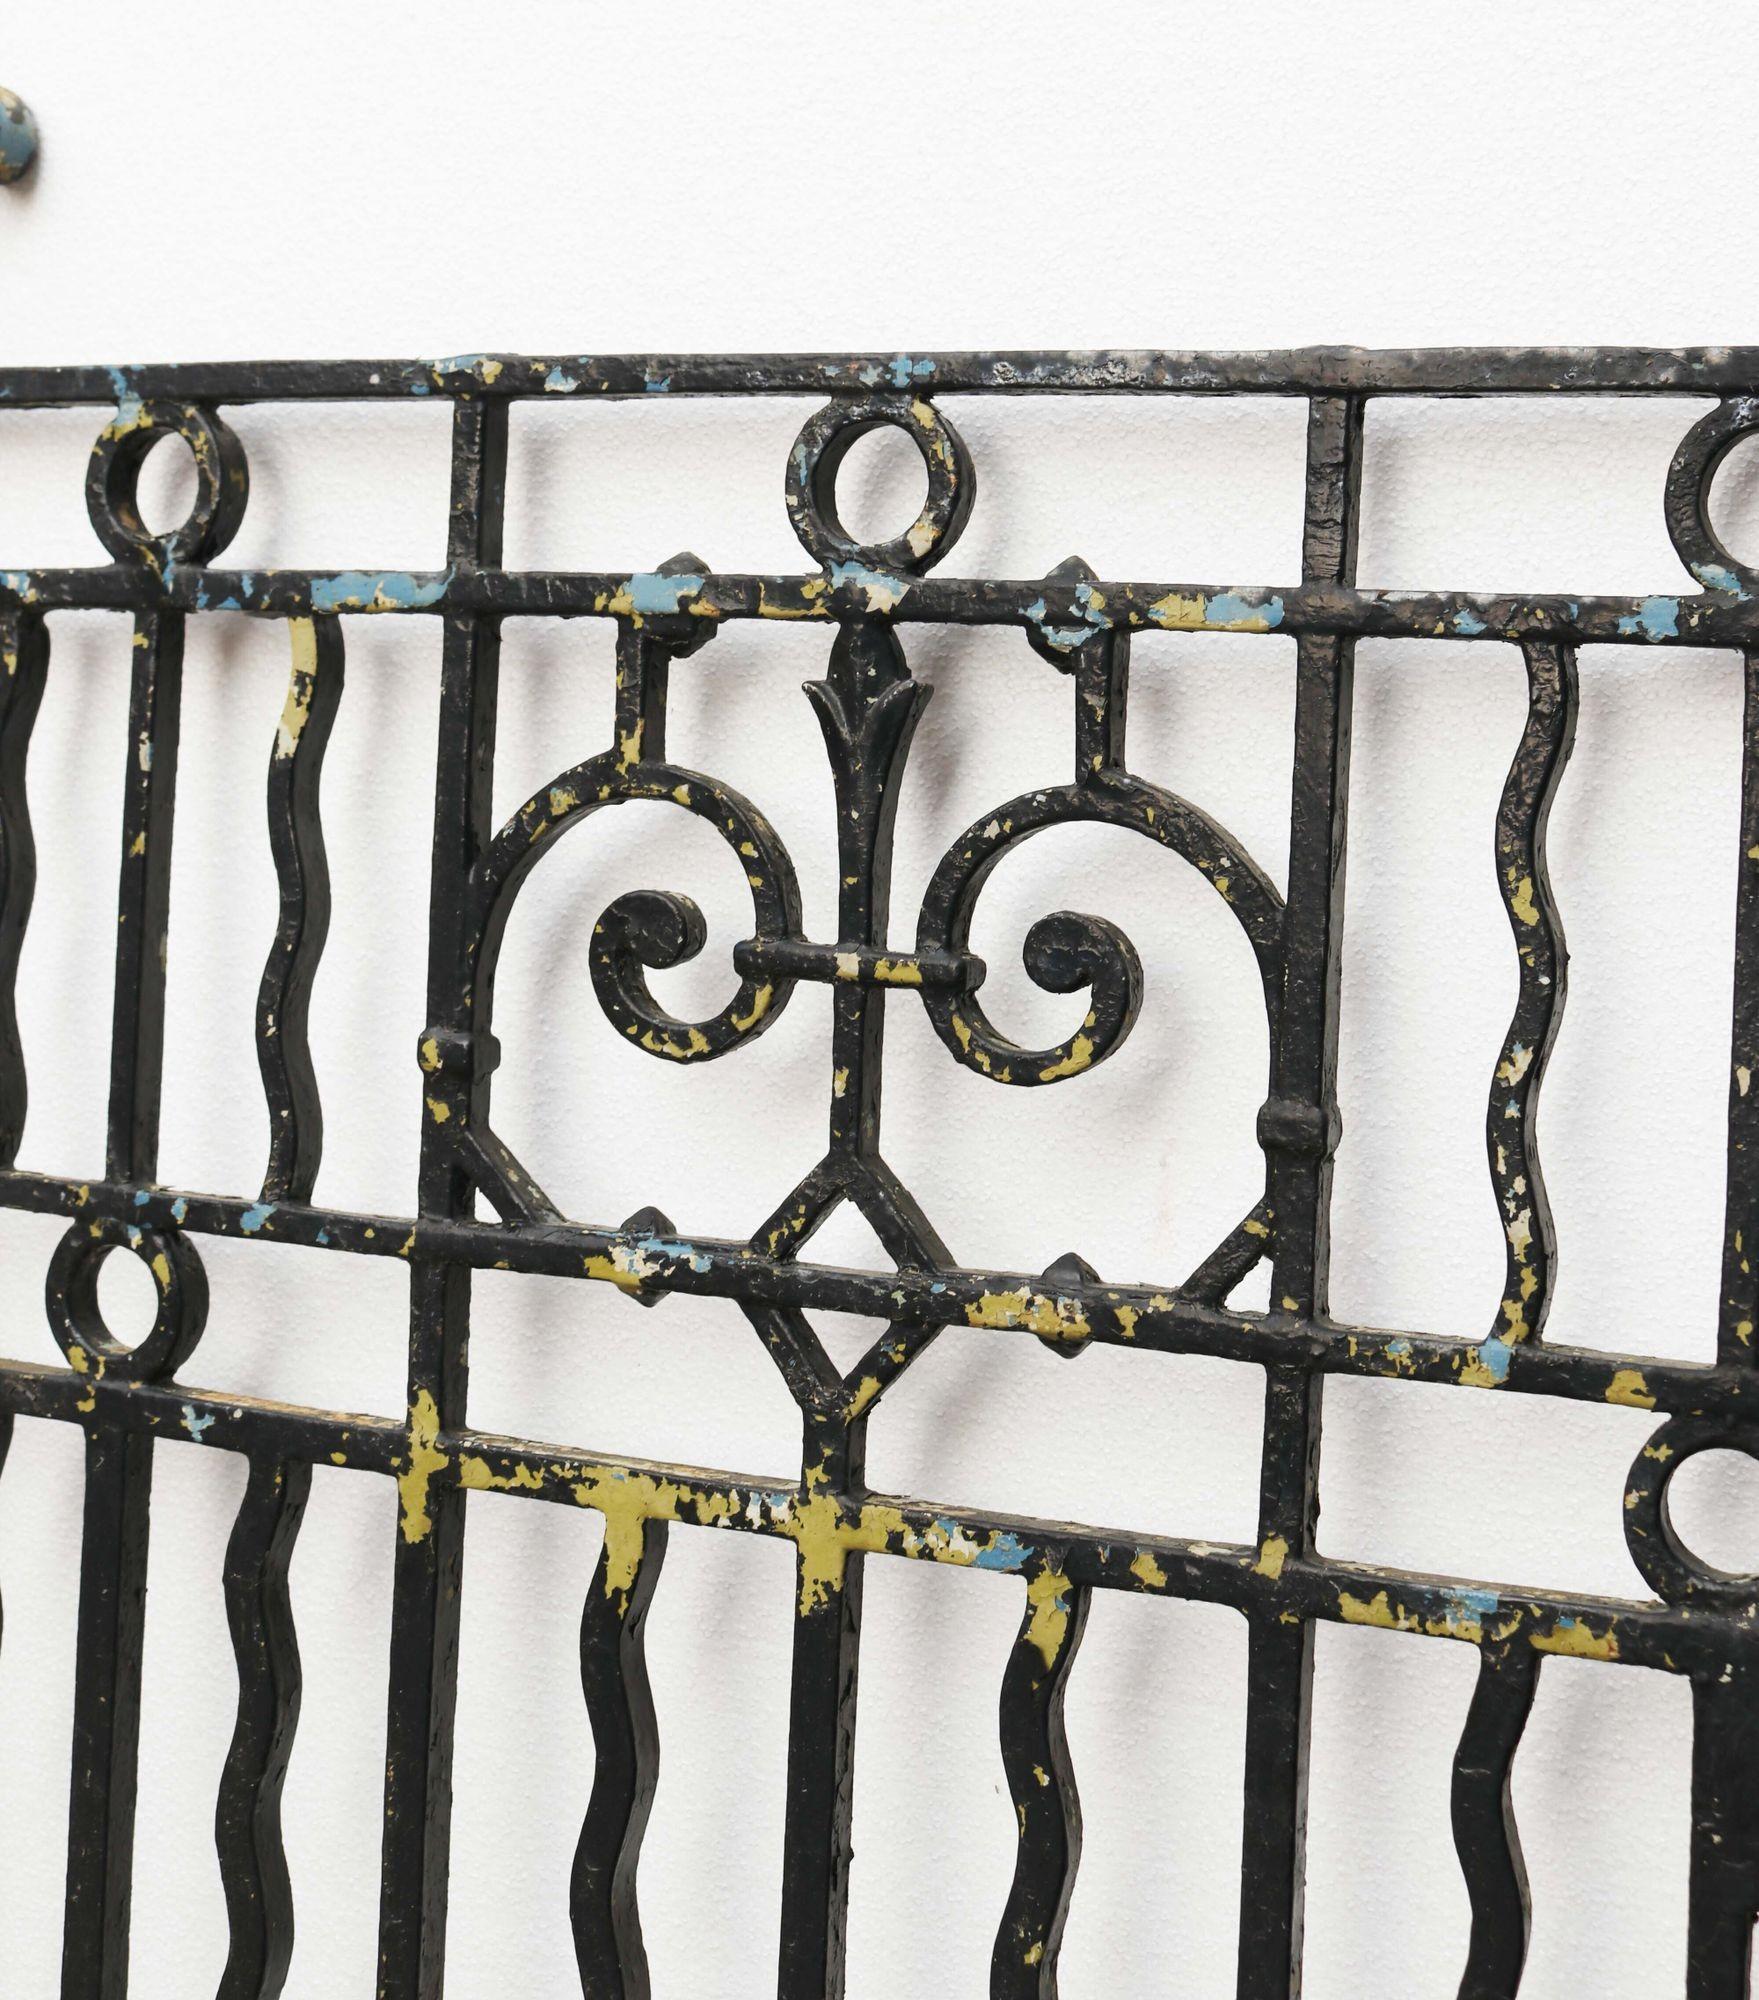 Antique Cast Iron Gate with Posts. A decorative side gate featuring some scroll work features in the centre, as well as two matching iron posts.

Additional Dimensions
Height of each post: 136 cm